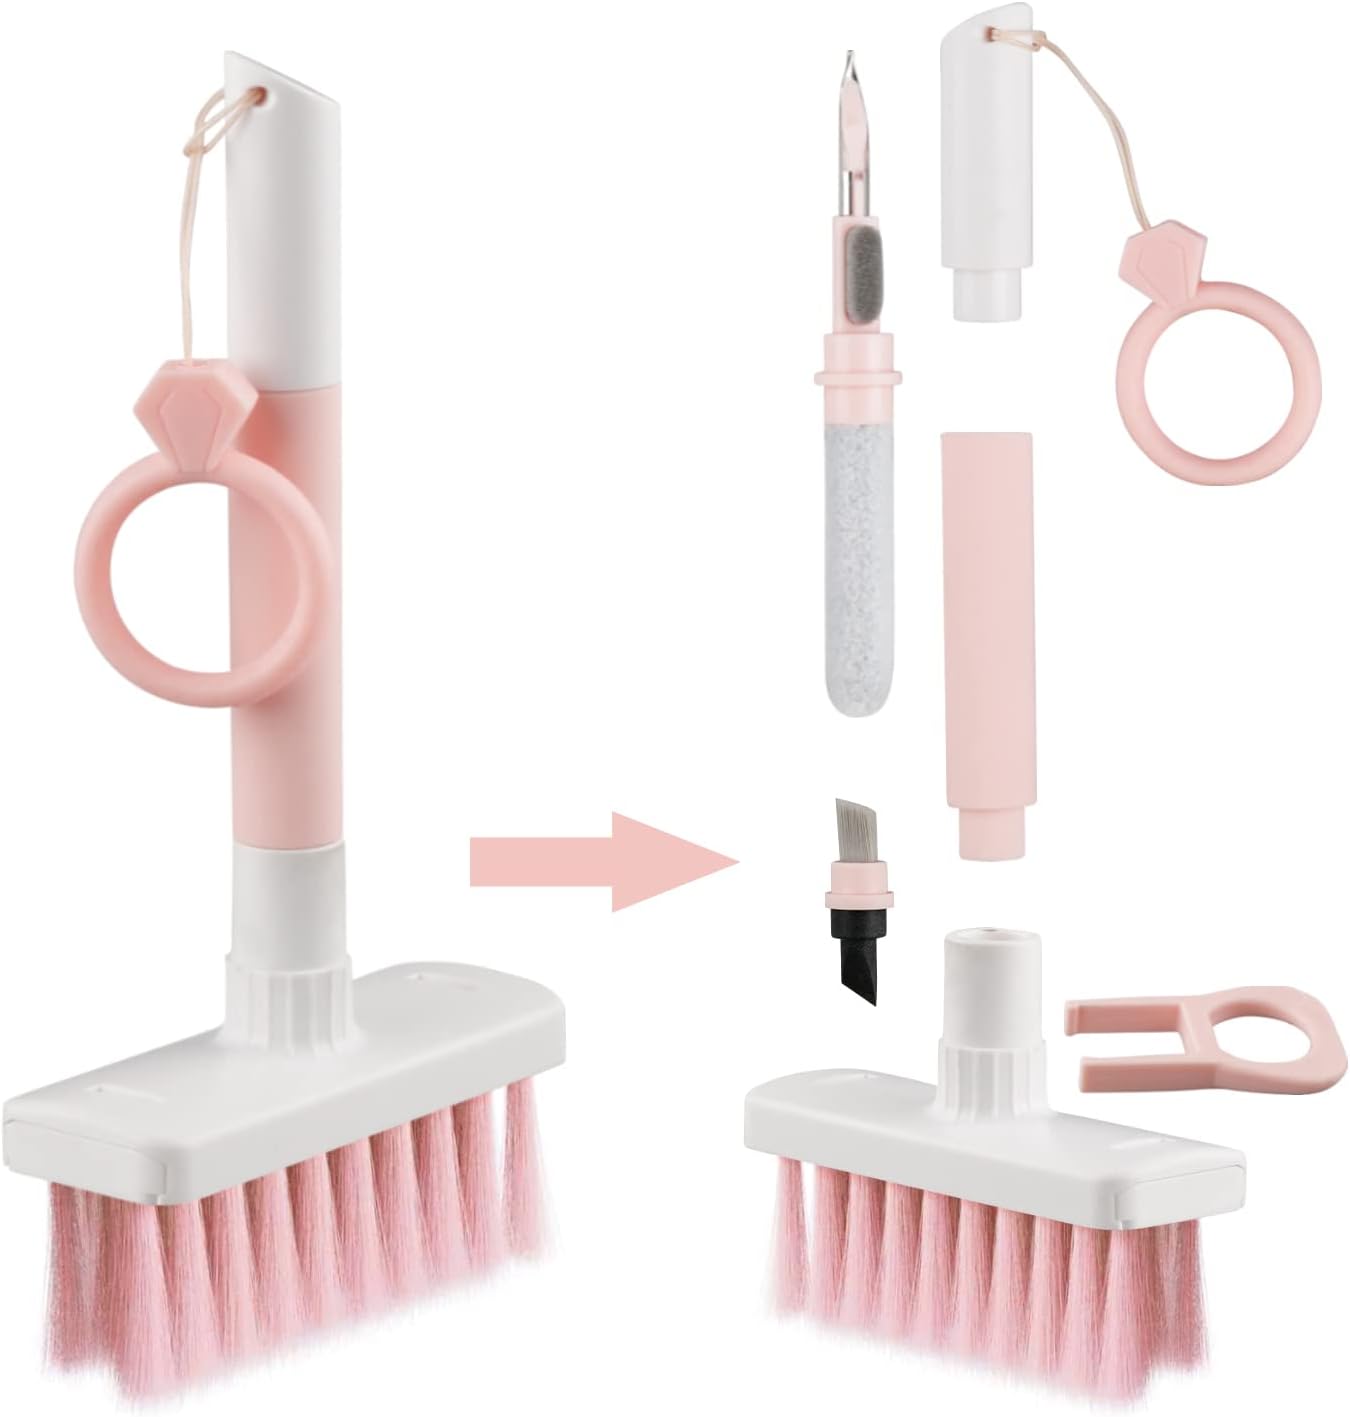 Soft Brush Keyboard Cleaner, Computer Cleaning Tool [...]